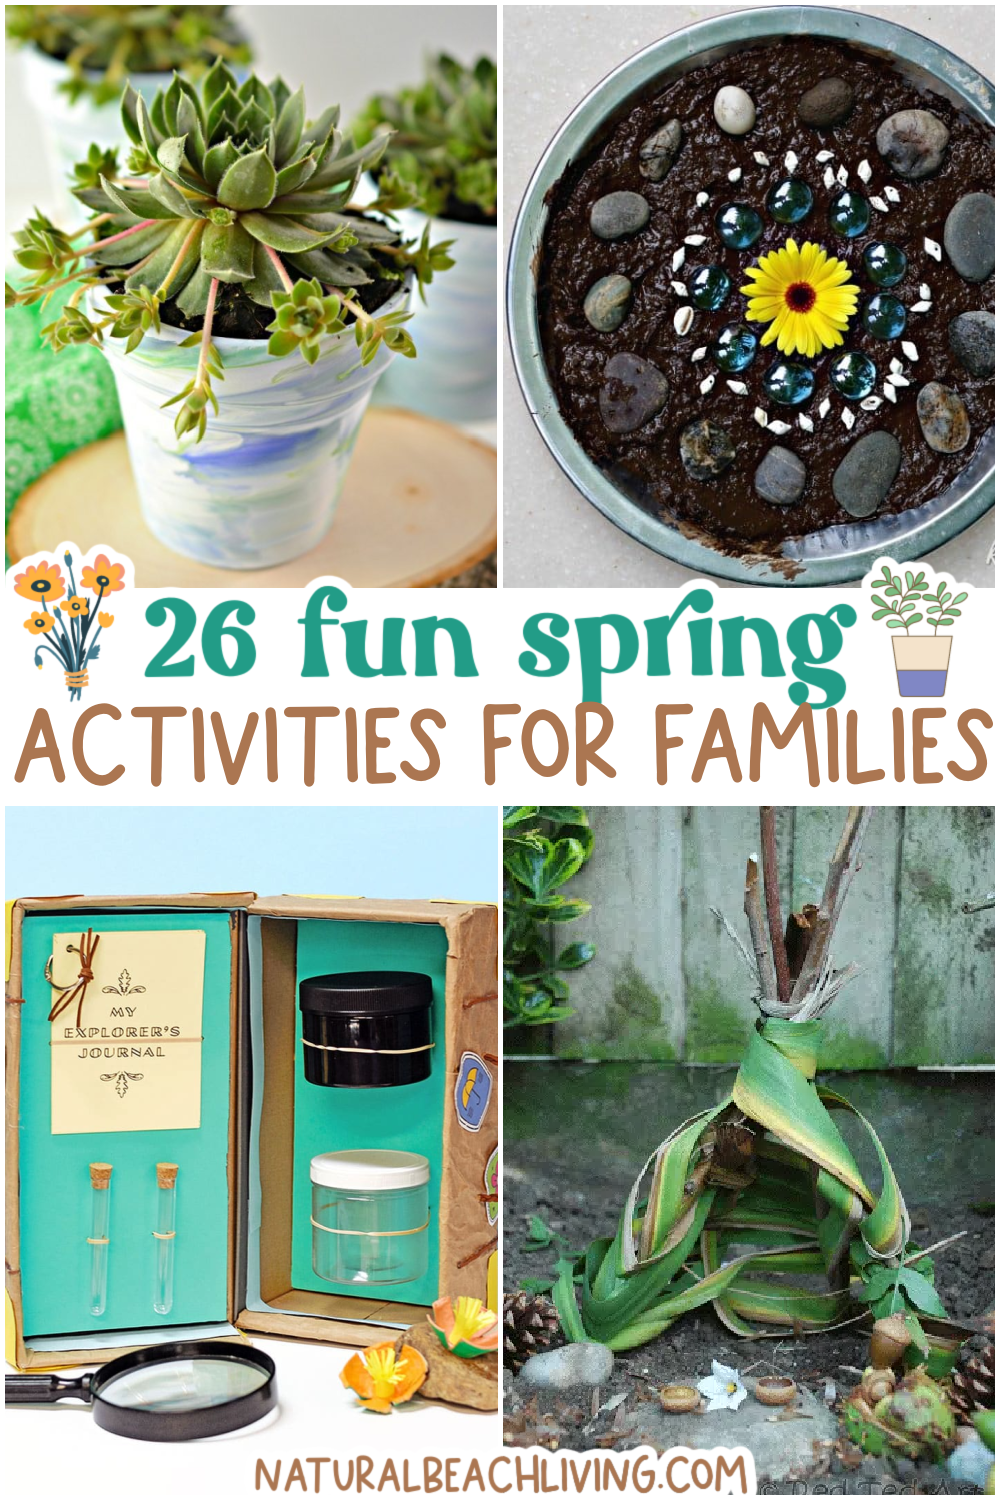 Step outside, enjoy the fresh air and have great family time with some of these fun spring activities for families. From exploring nature, and homemade bird feeders, to scavenger hunts, and family art projects together, there's something here for everyone. 